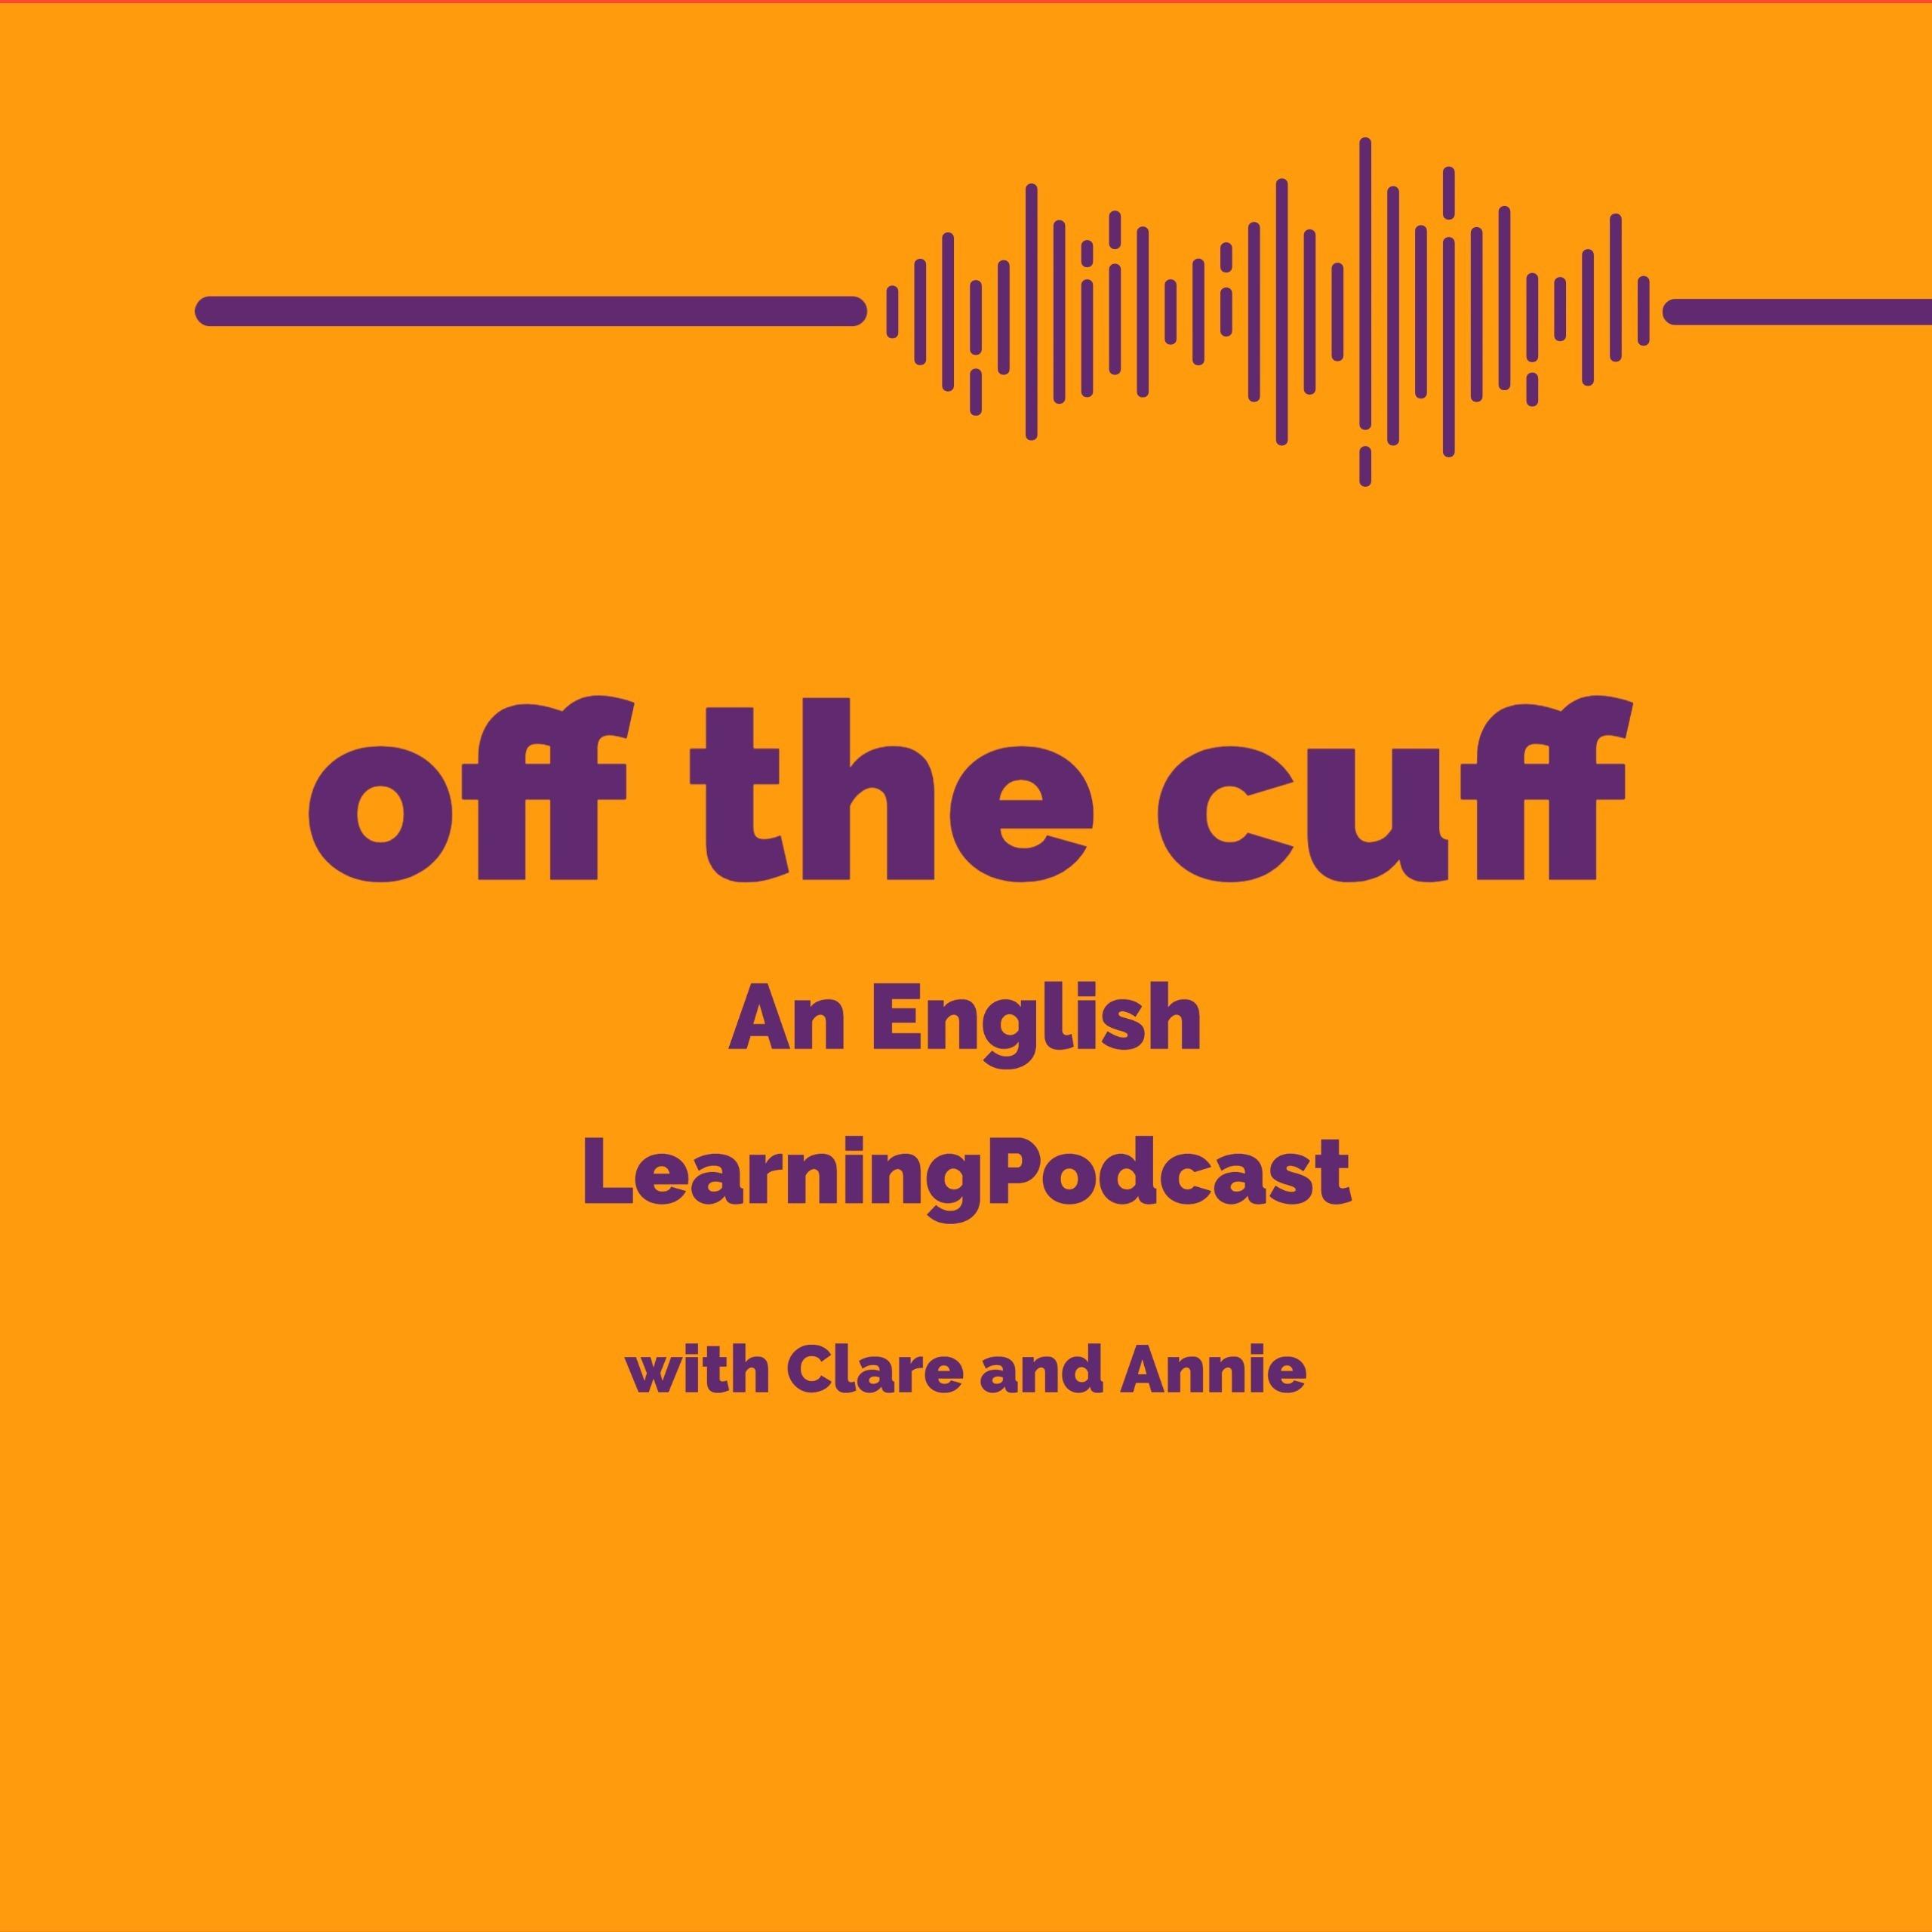 off the cuff: An English Learning Podcast